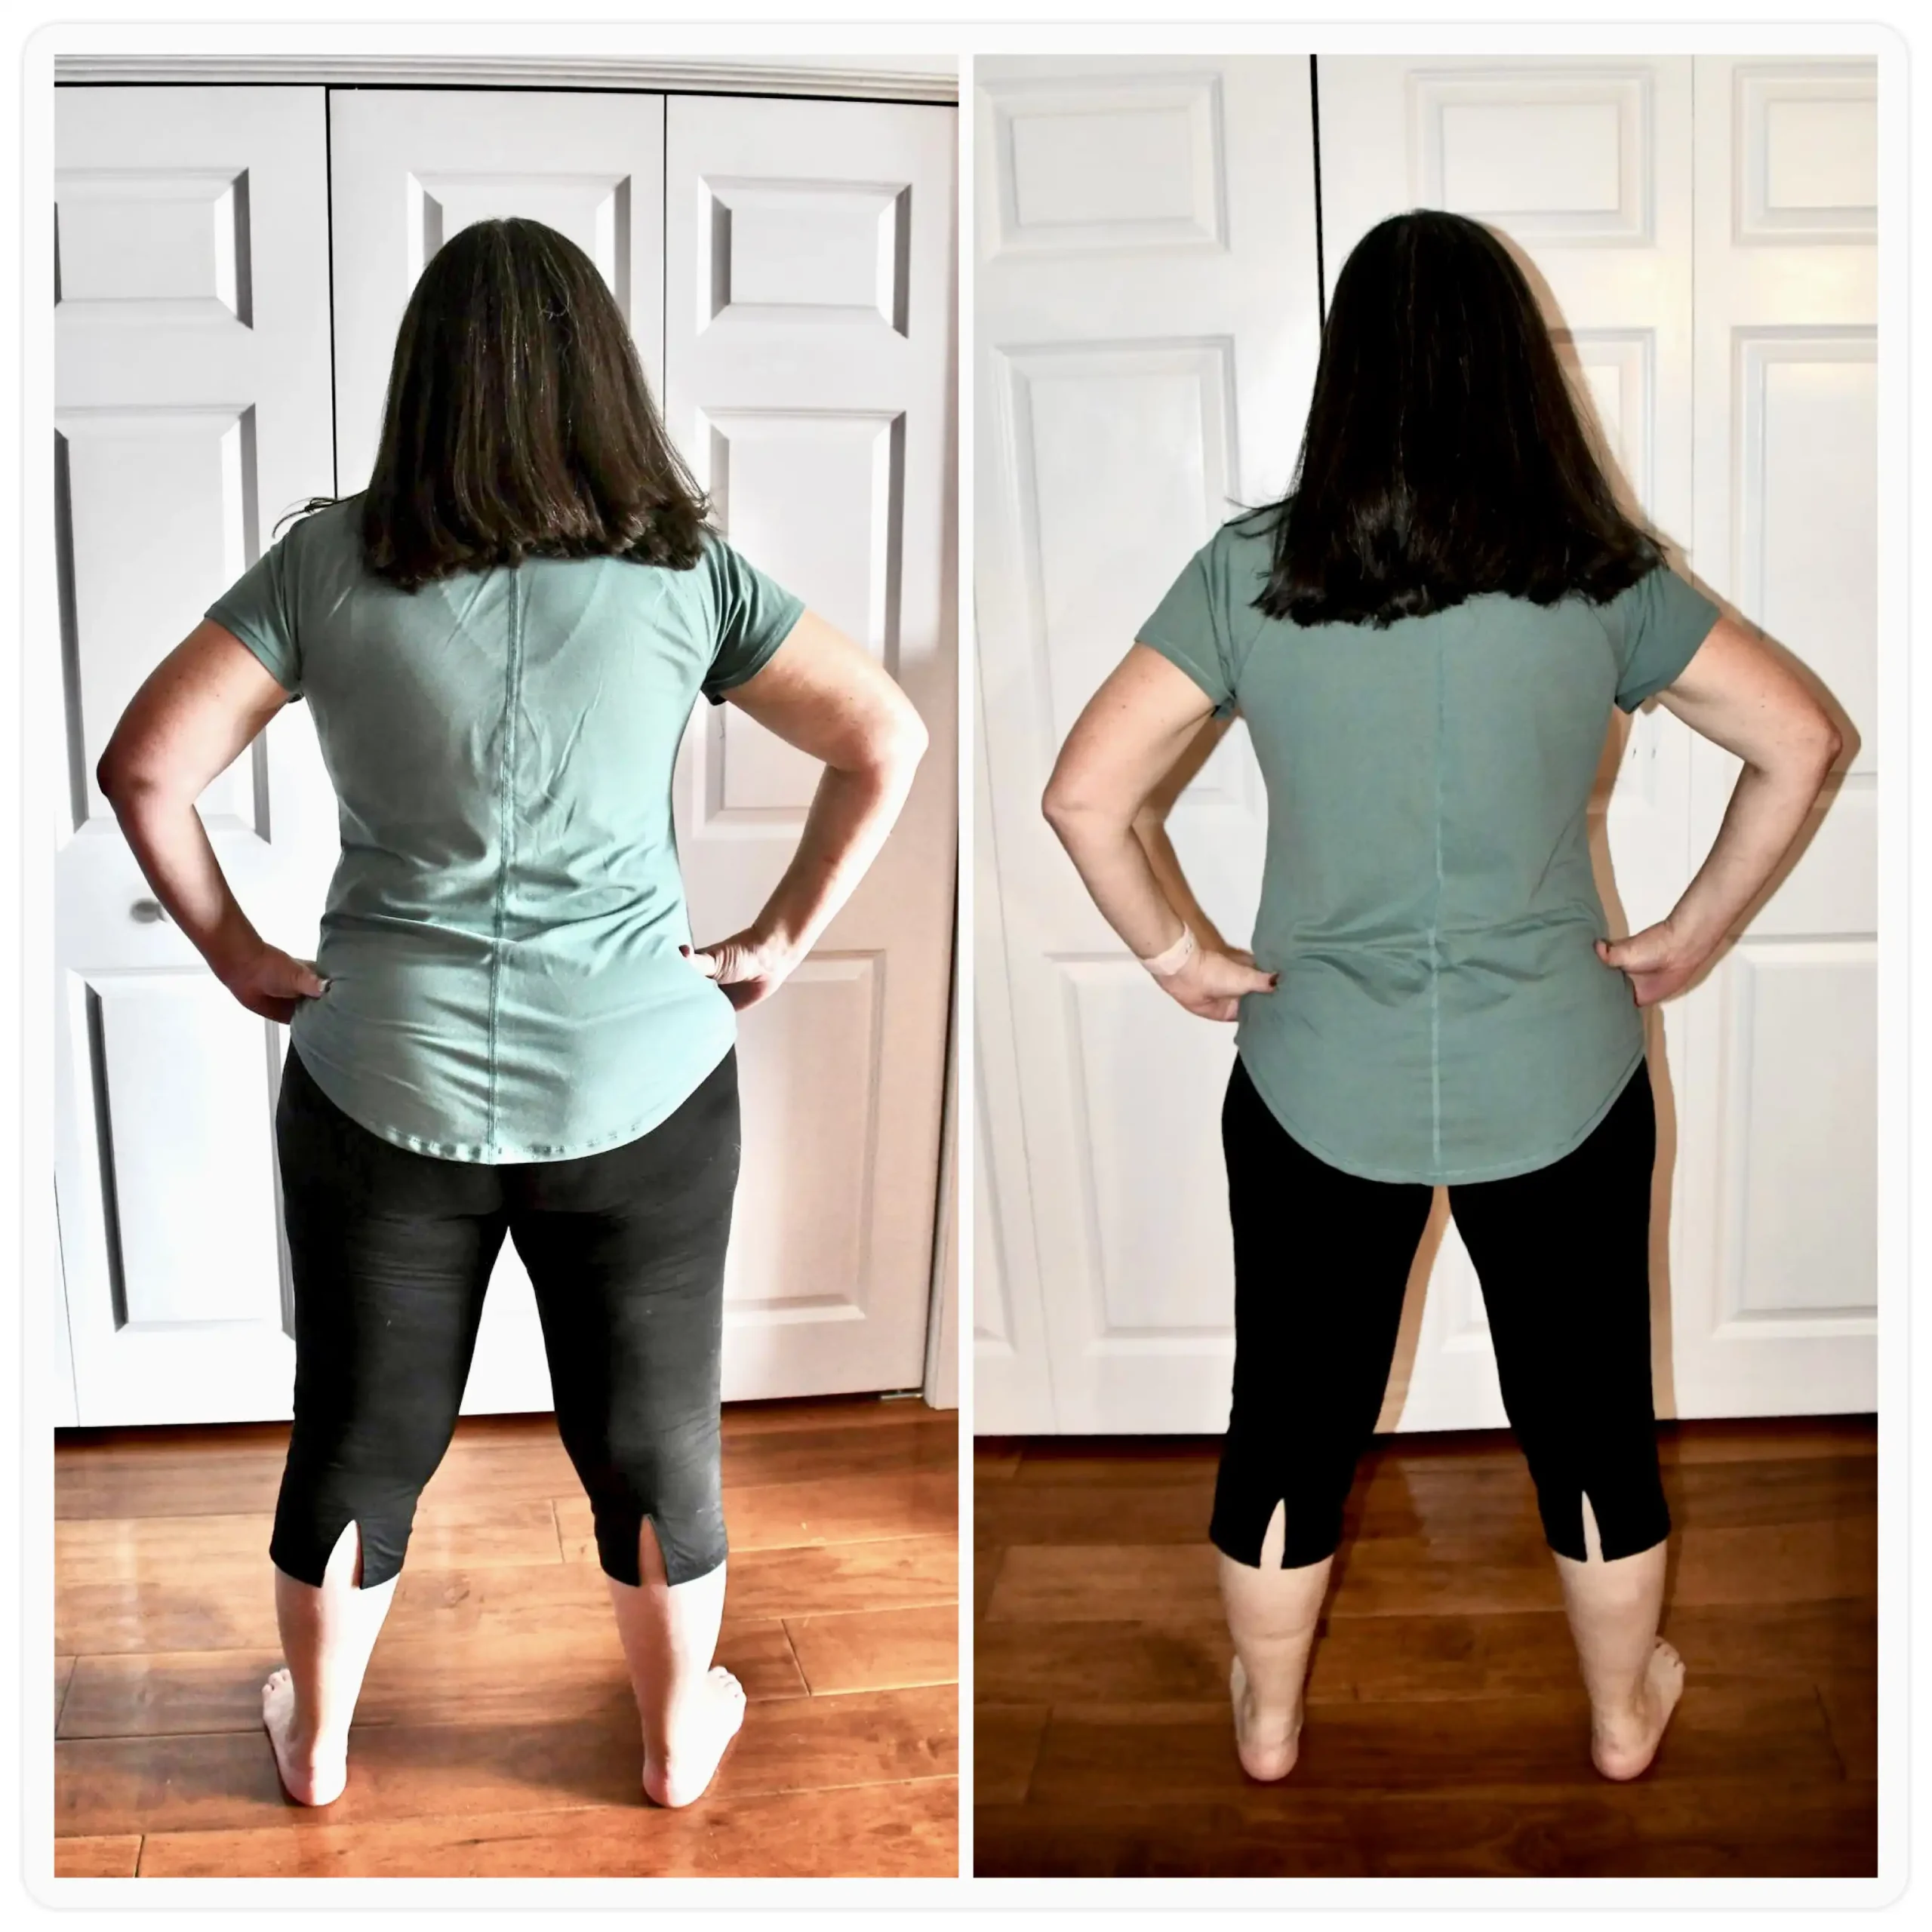 Barbara J before and after weight loss back view